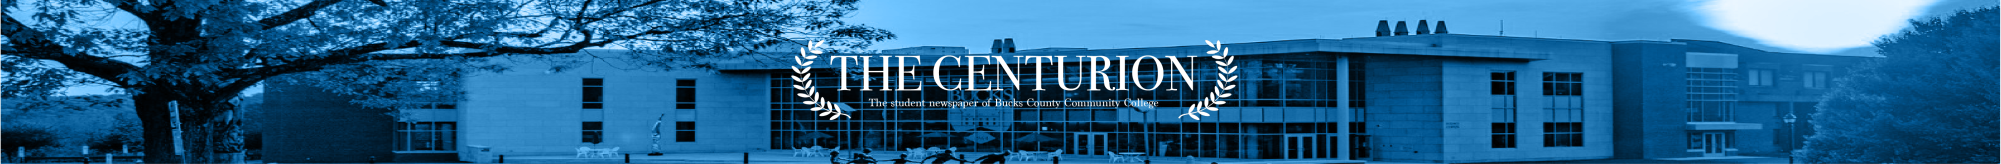 The student newspaper of Bucks County Community College